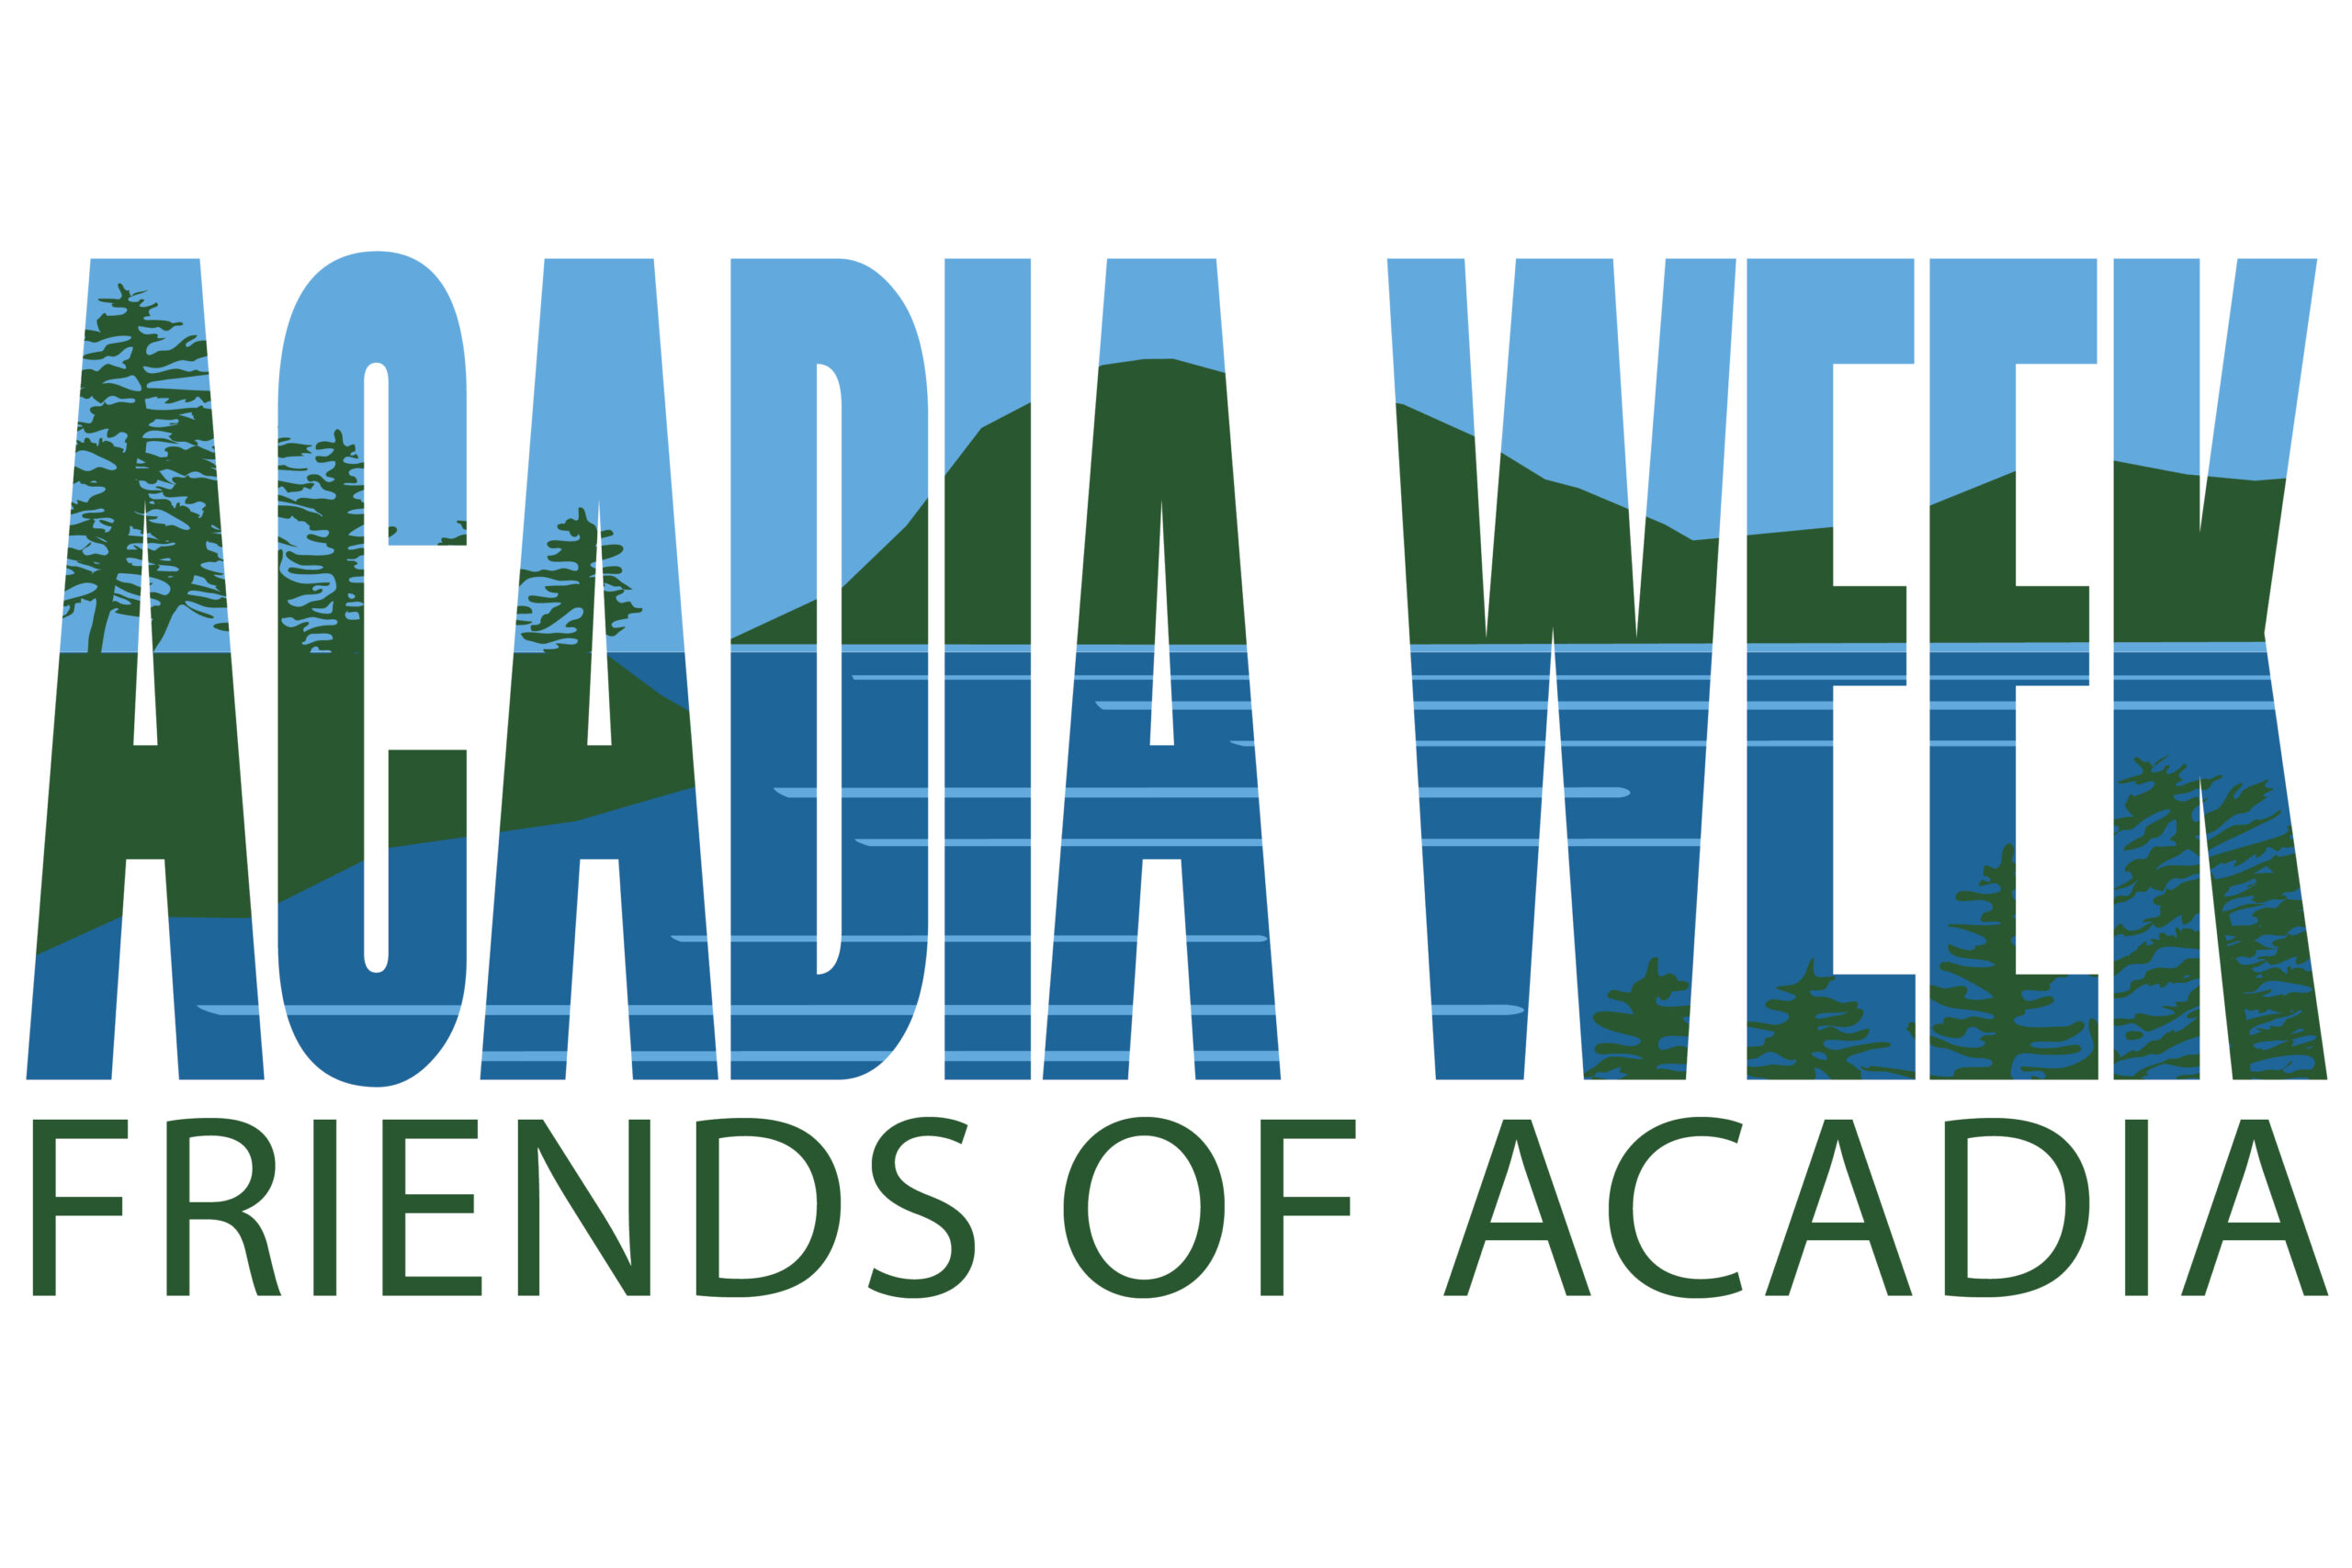 Live Broadcasts planned for Acadia Week, July 8-12